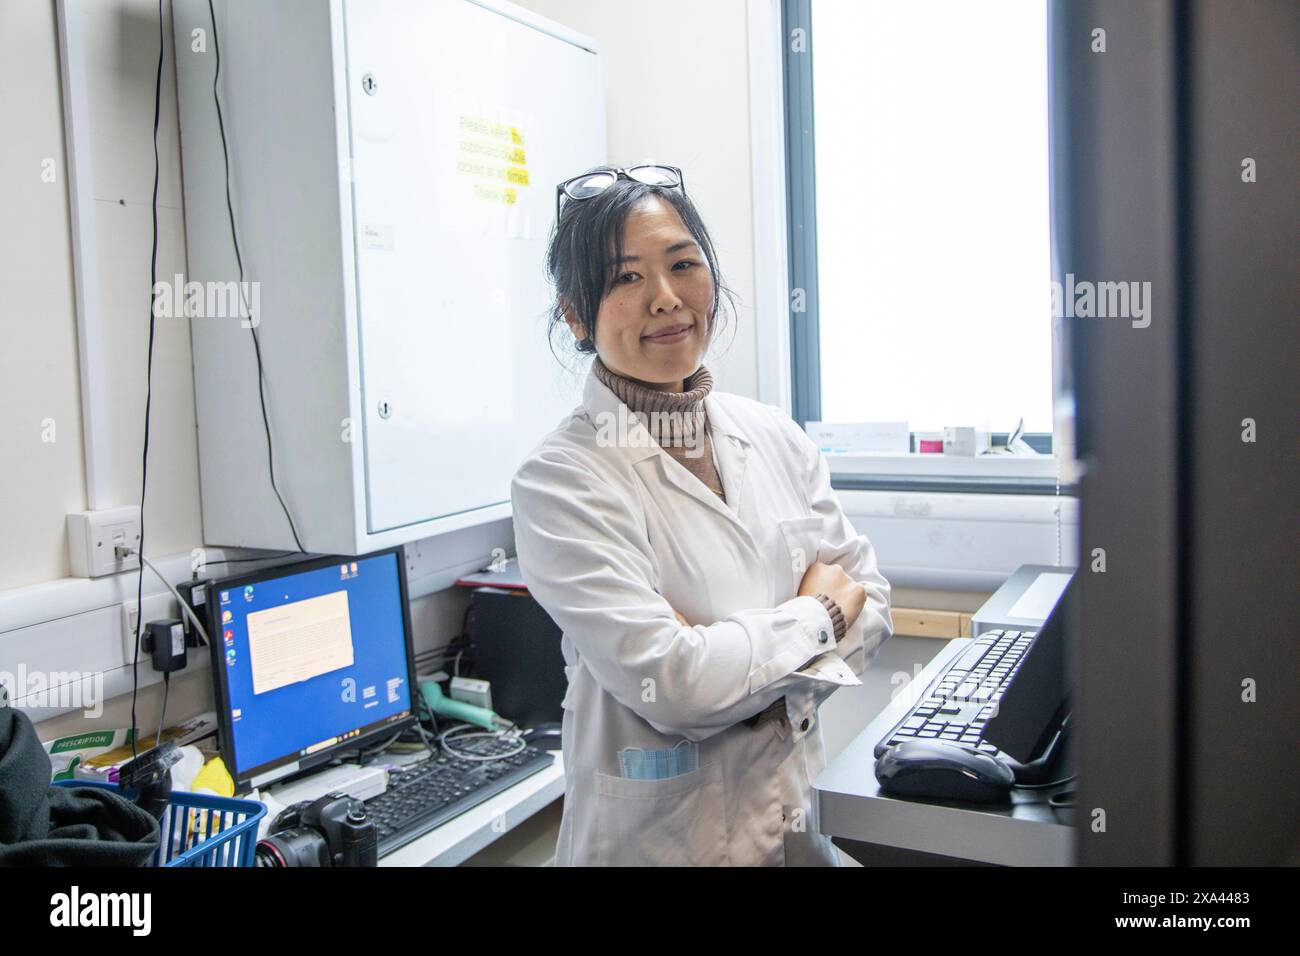 Scientist standing in a lab of a medical practice with computer equipment, UK Stock Photo